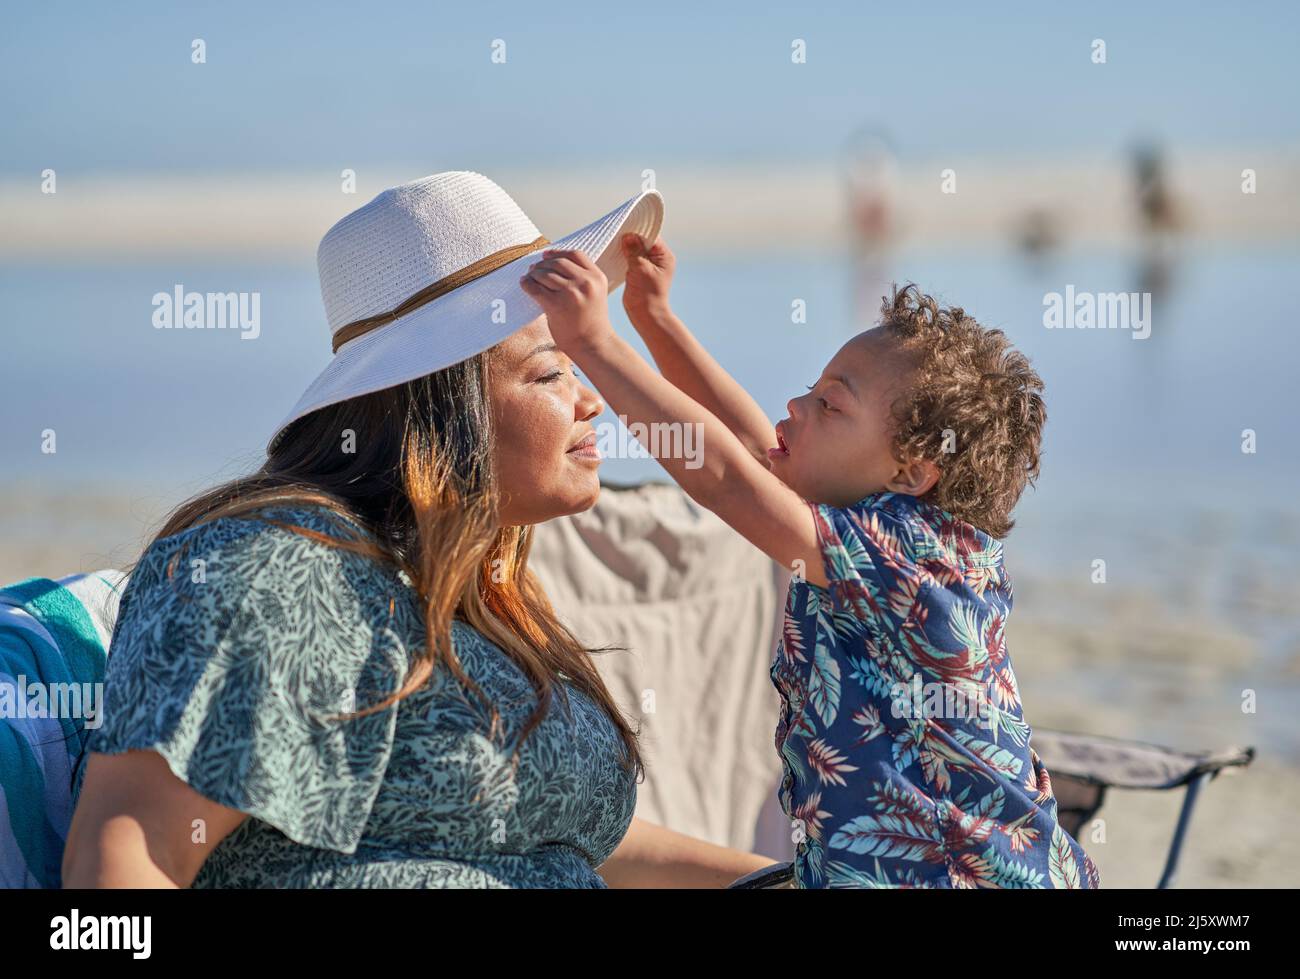 Curious son with Down Syndrome lifting mother's hat on beach Stock Photo